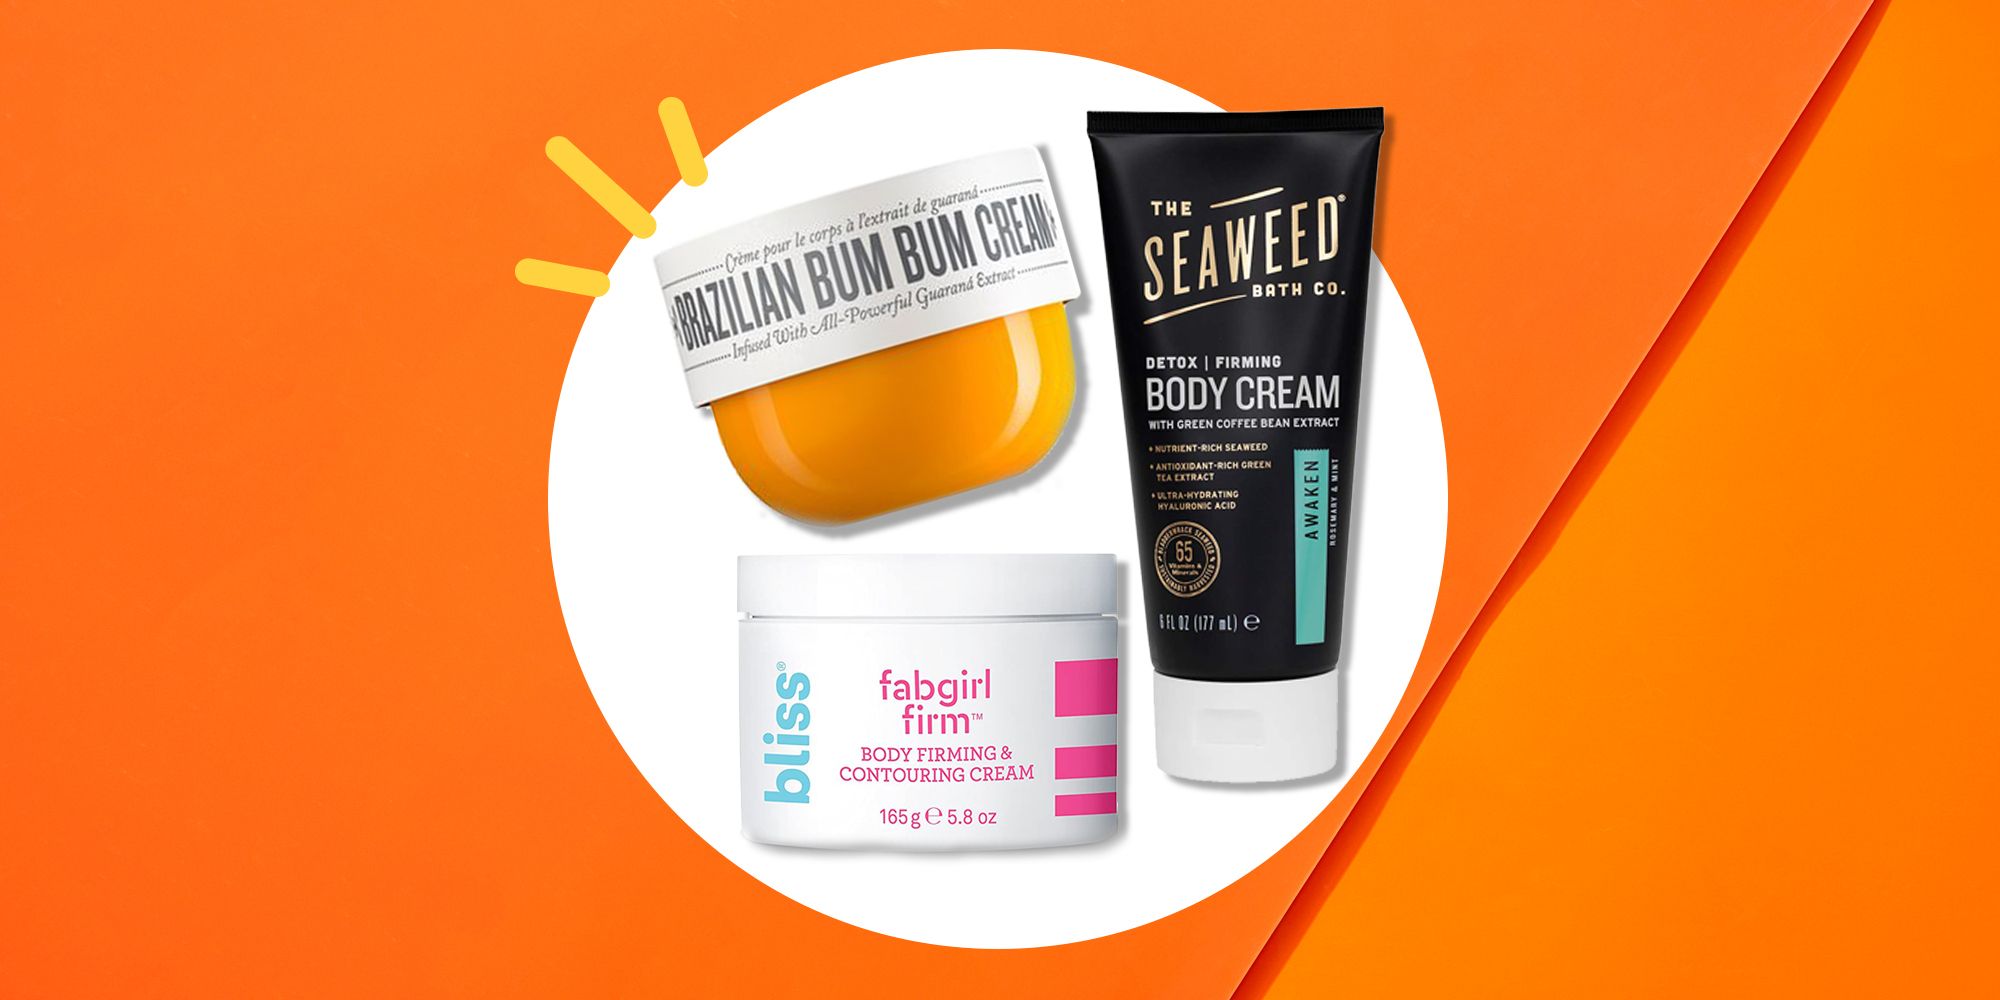 Best anti-cellulite products